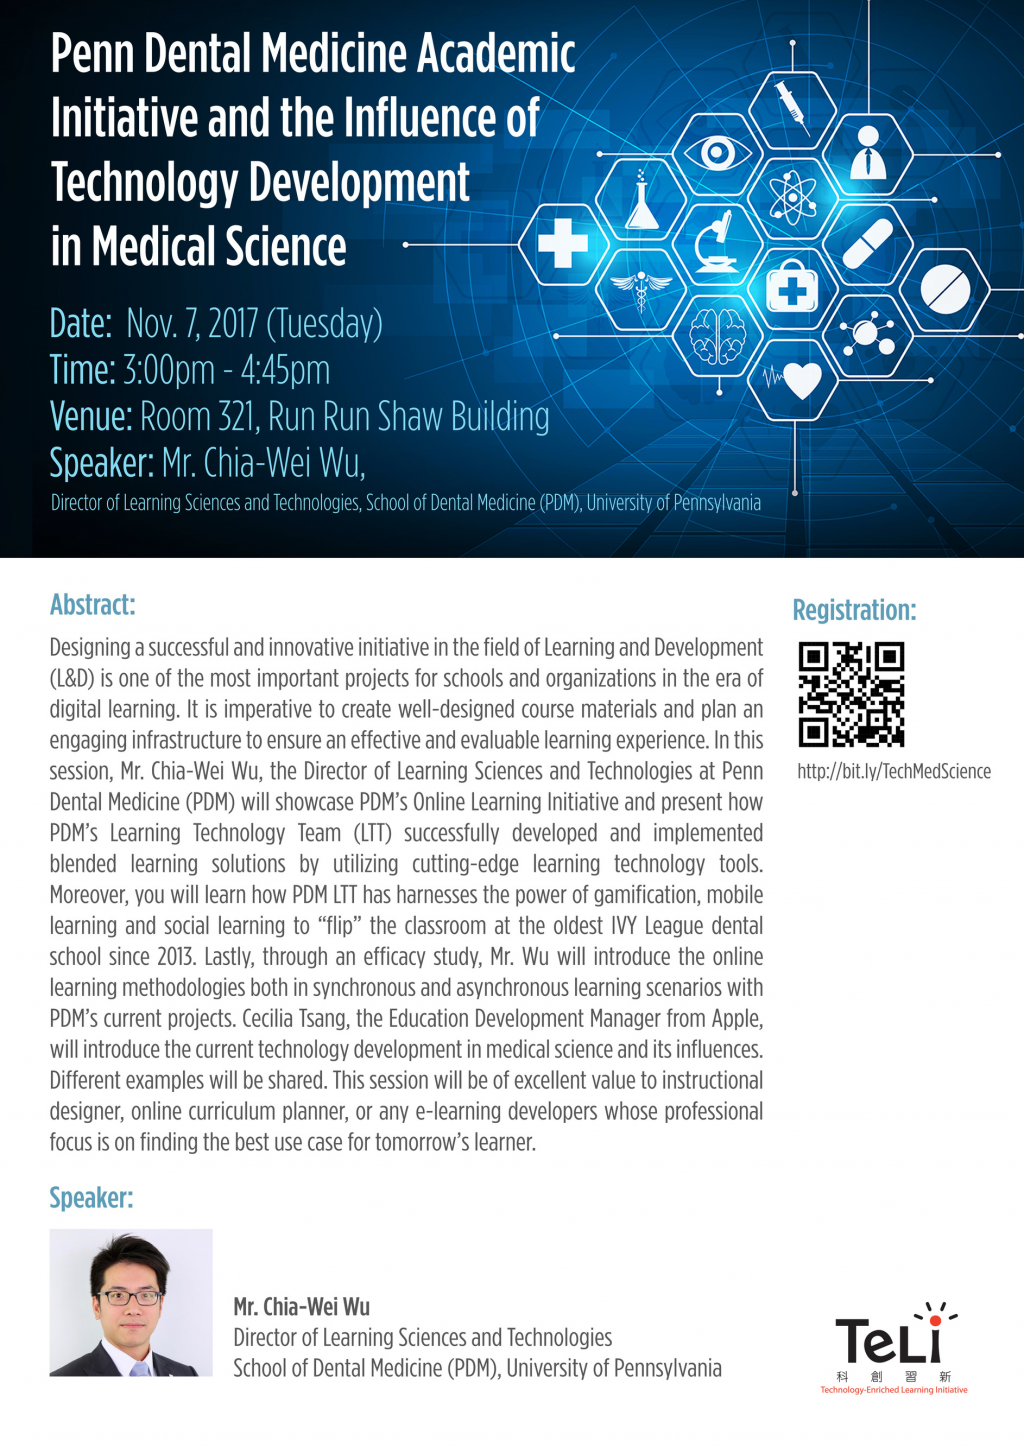 TELI Seminar - Penn Dental Medicine Academic Initiative and the Influence of Technology Development in Medical Science